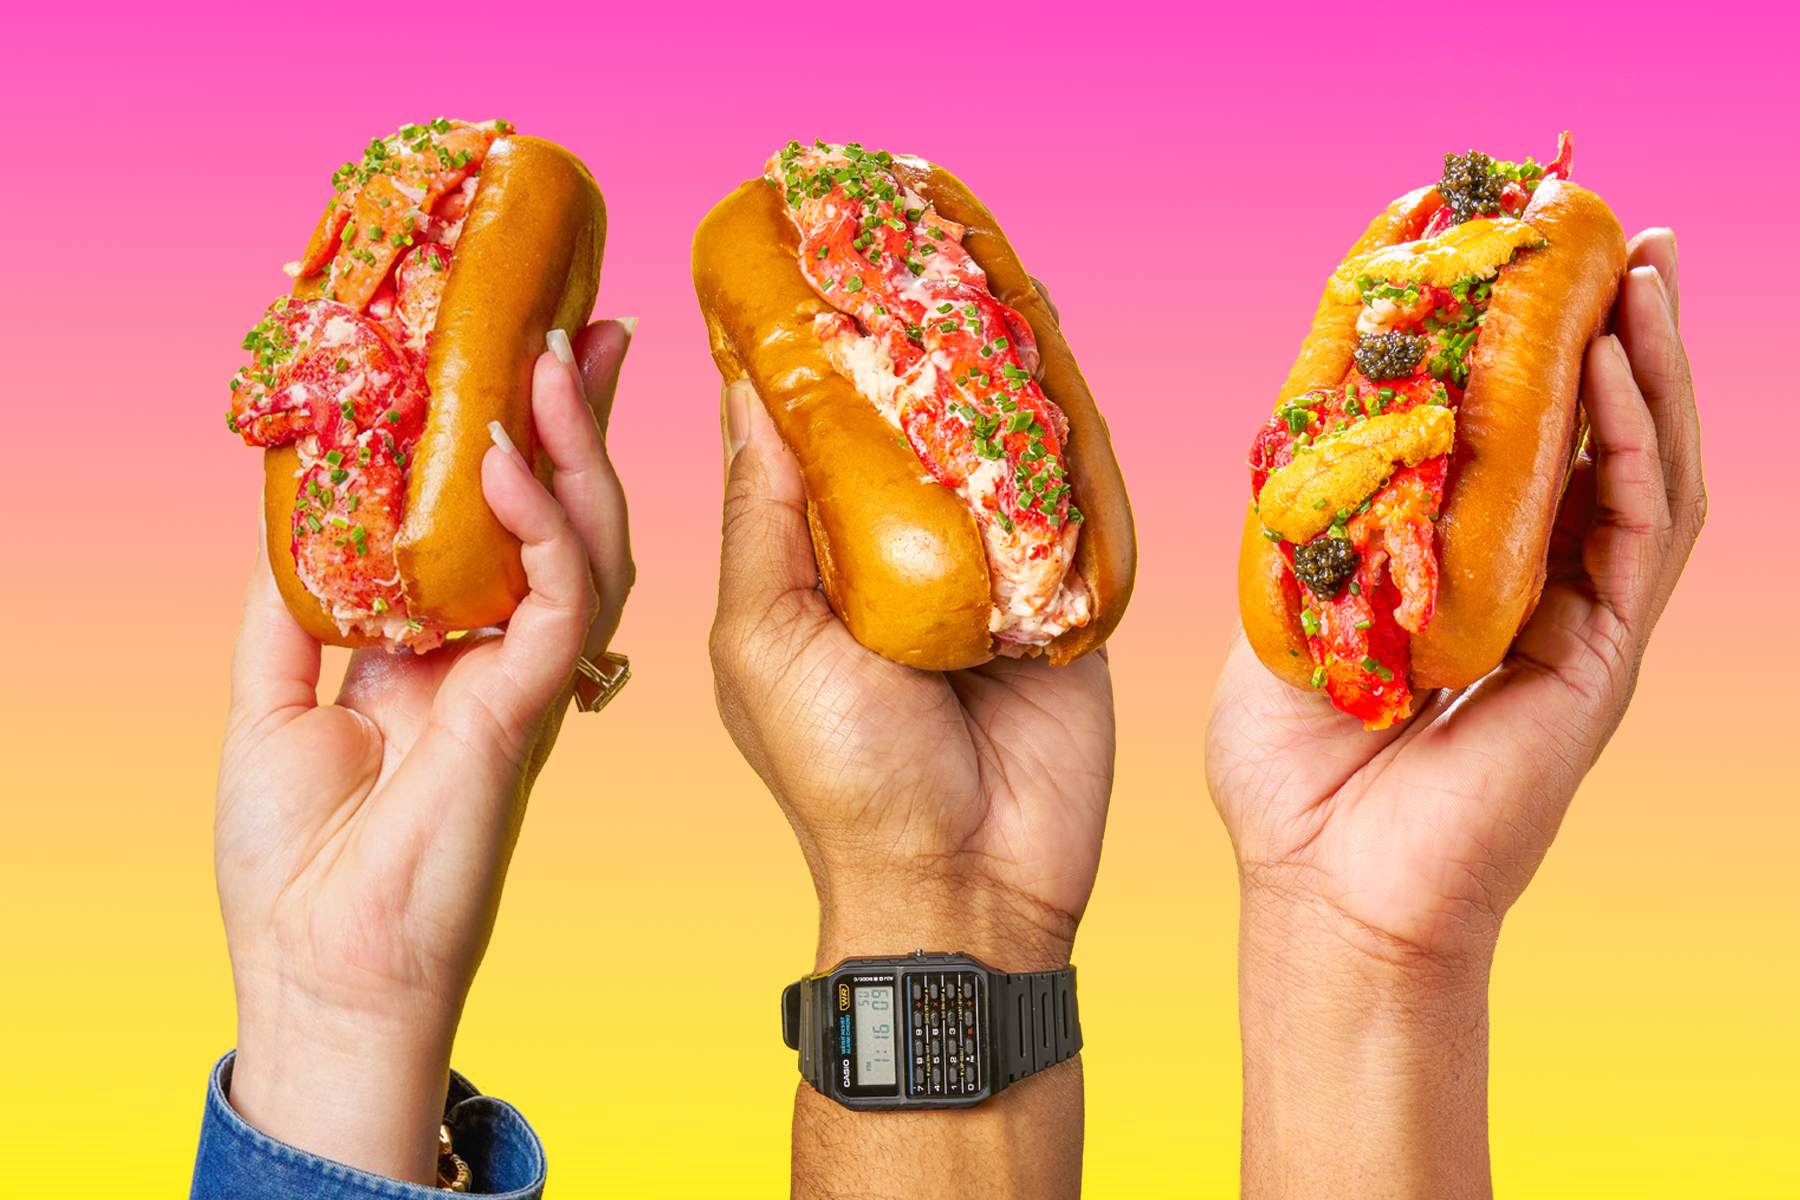 A trio of hands, one using a watch, holding up lobster rolls against a pink and yellow background.